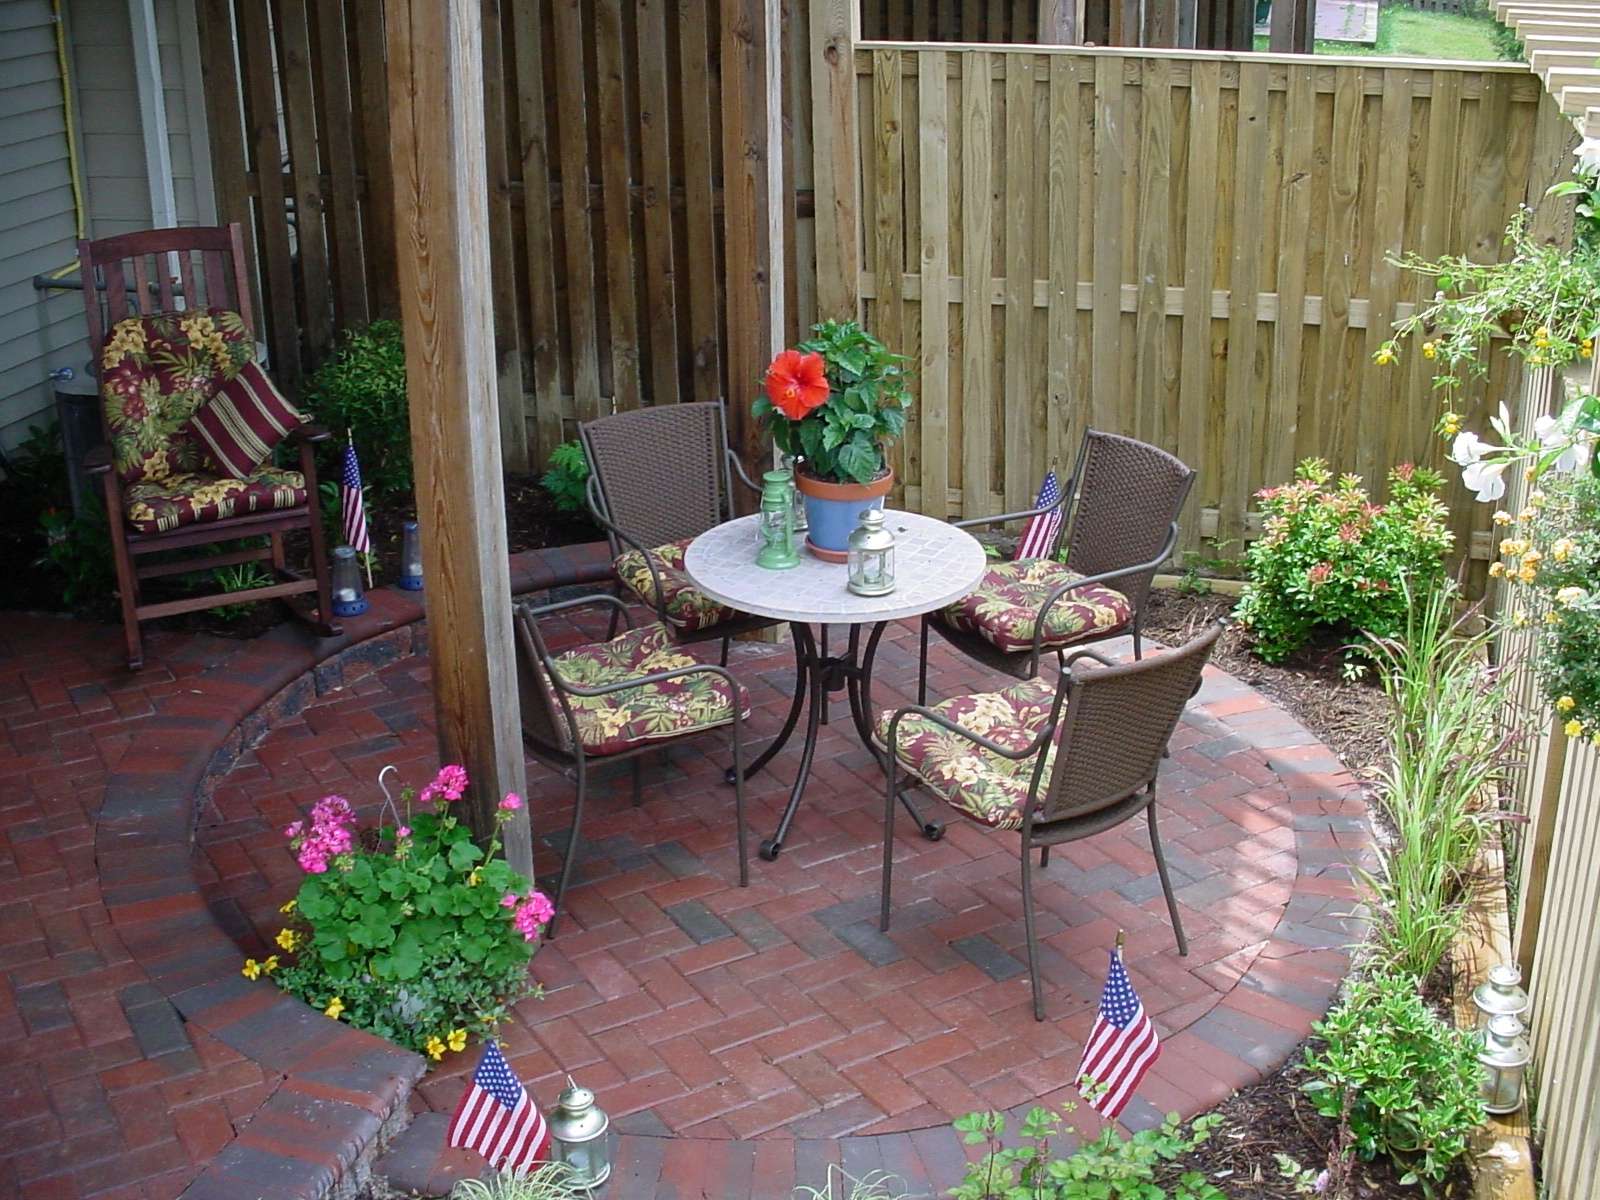 Enclosed townhouse patio with small plants and flowers